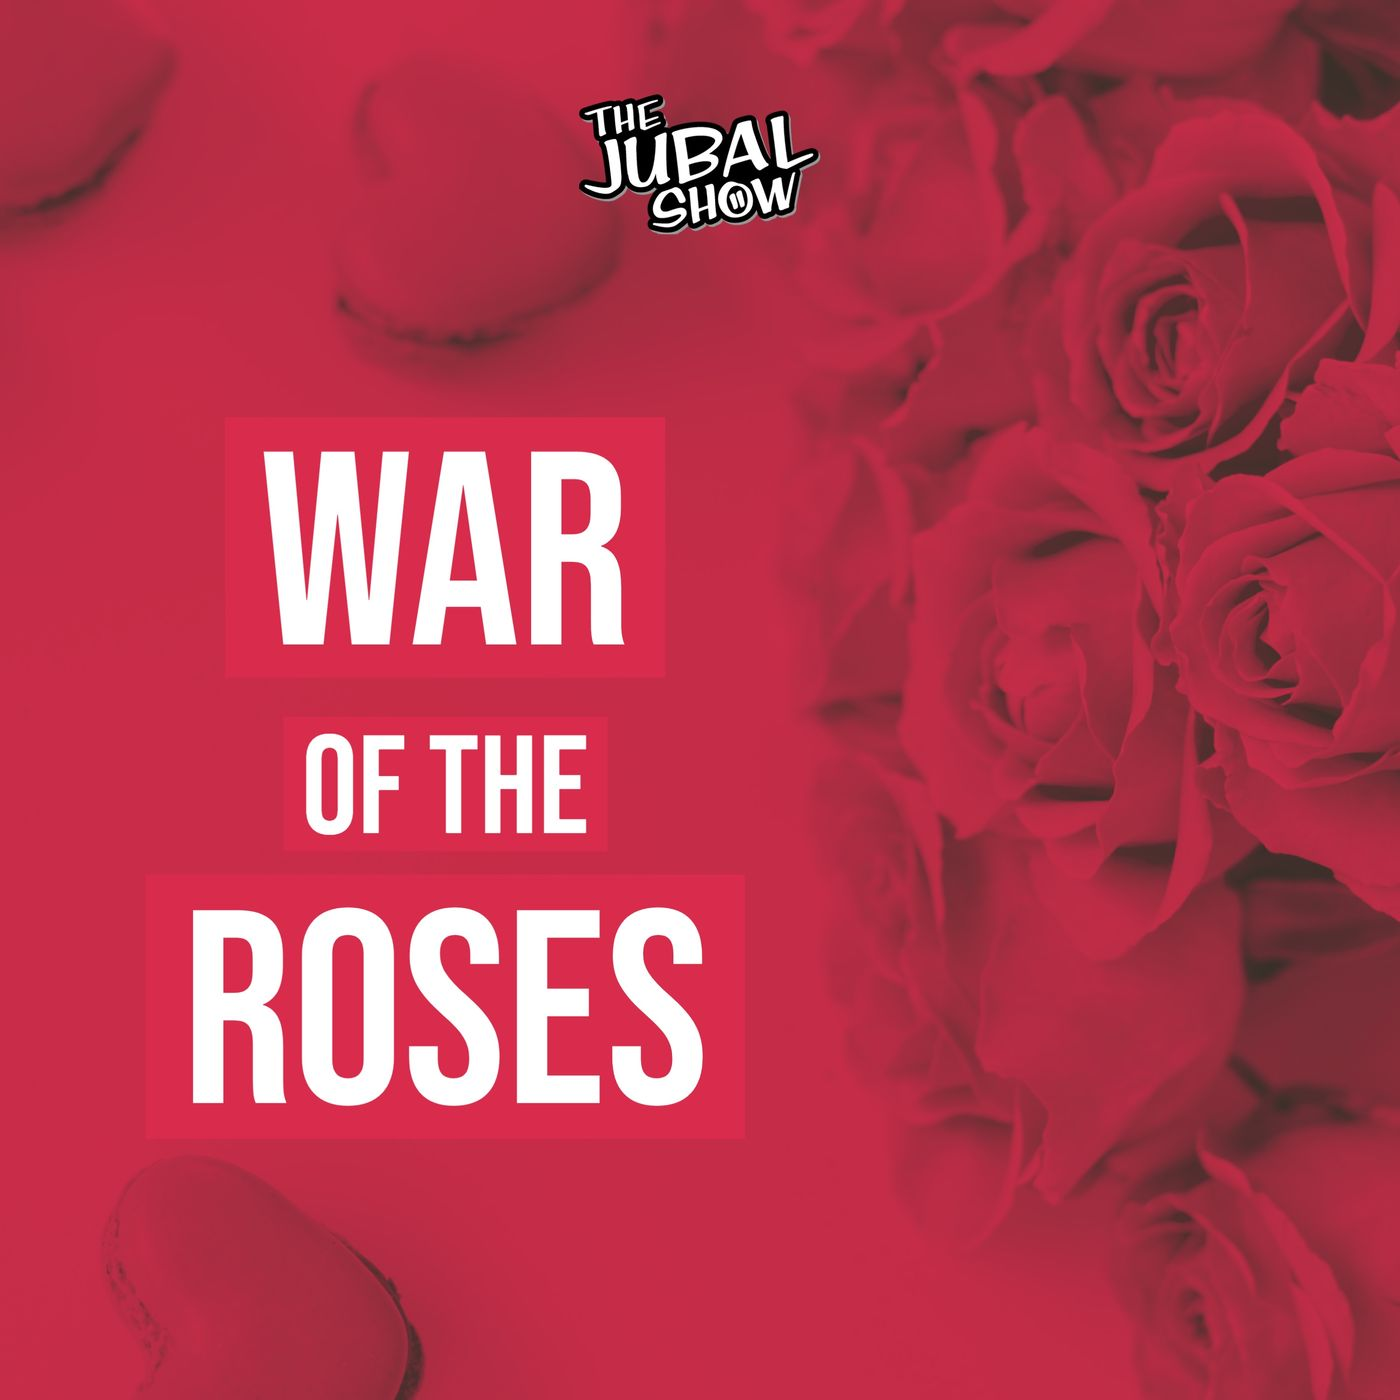 The couple in this War of the Roses has A LOT to figure out!